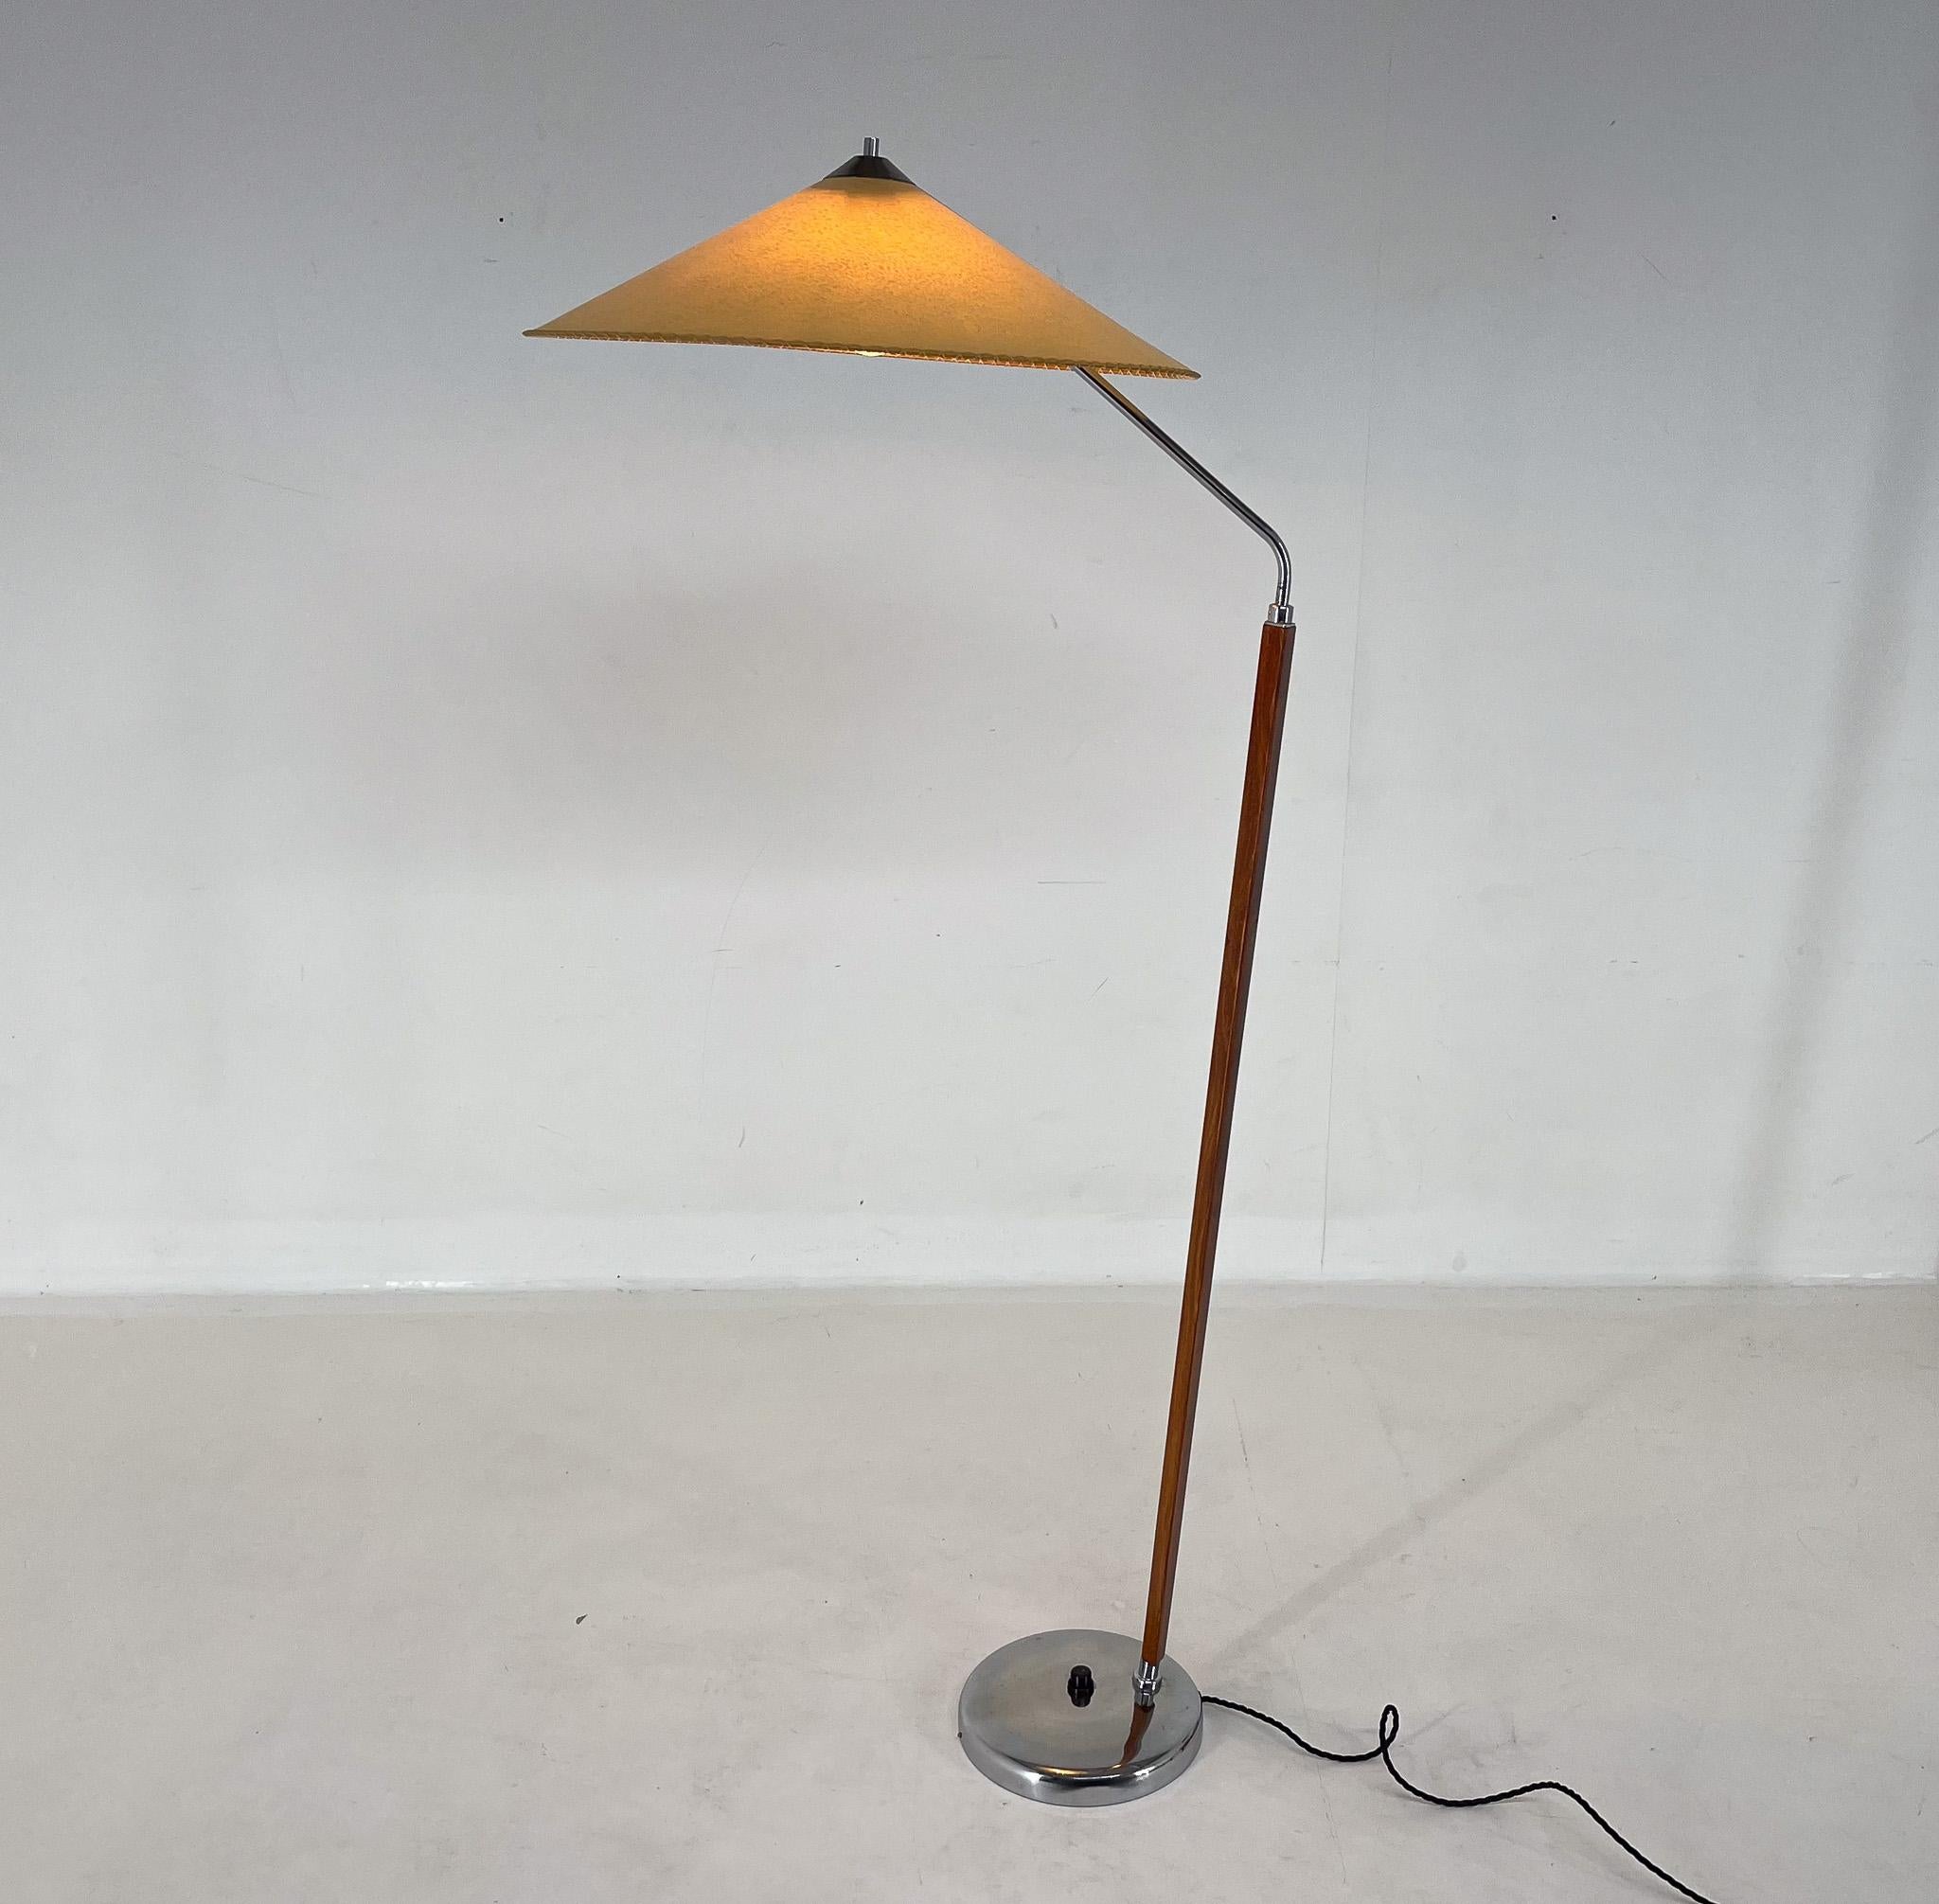 Iconic Zukov floor lamp made in former Czechoslovakia in the 1960s.
Completely restored, polished, new hand made parchment shade, rewired:
2x40W, E25-E27 bulbs.
US plug adapter included.